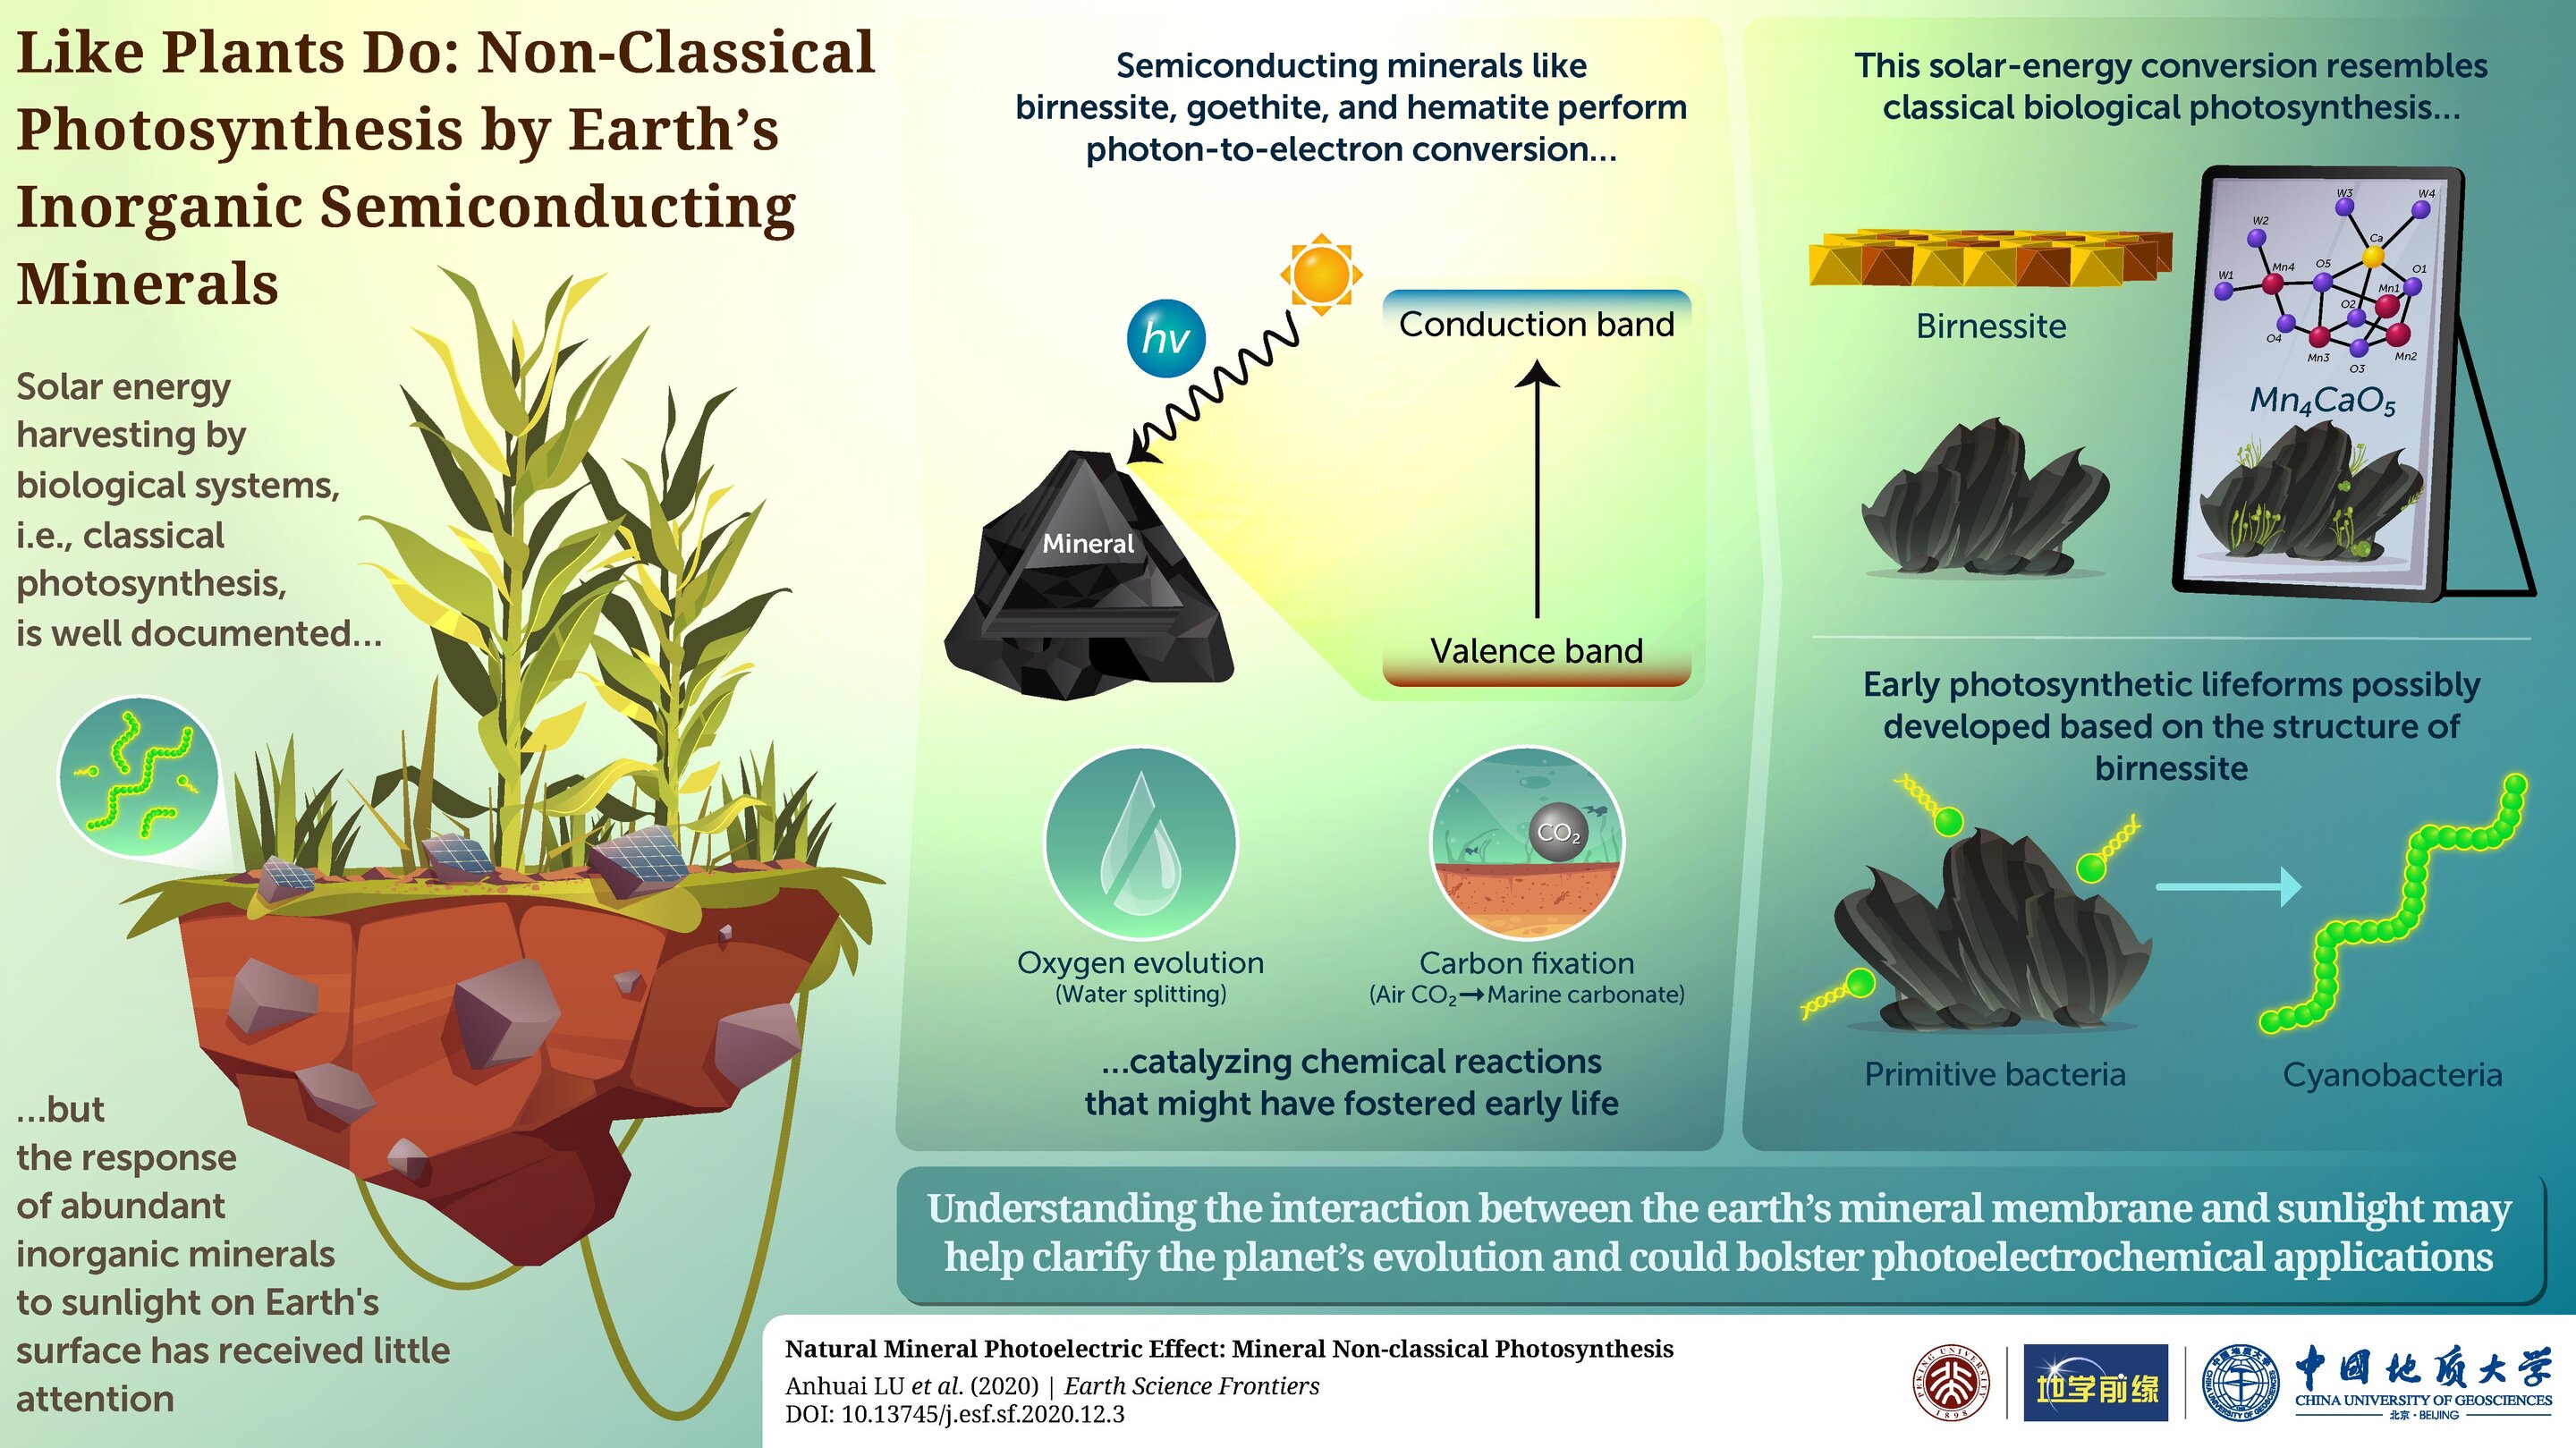 Non-classical photosynthesis by earth's inorganic semiconducting minerals - Phys.org